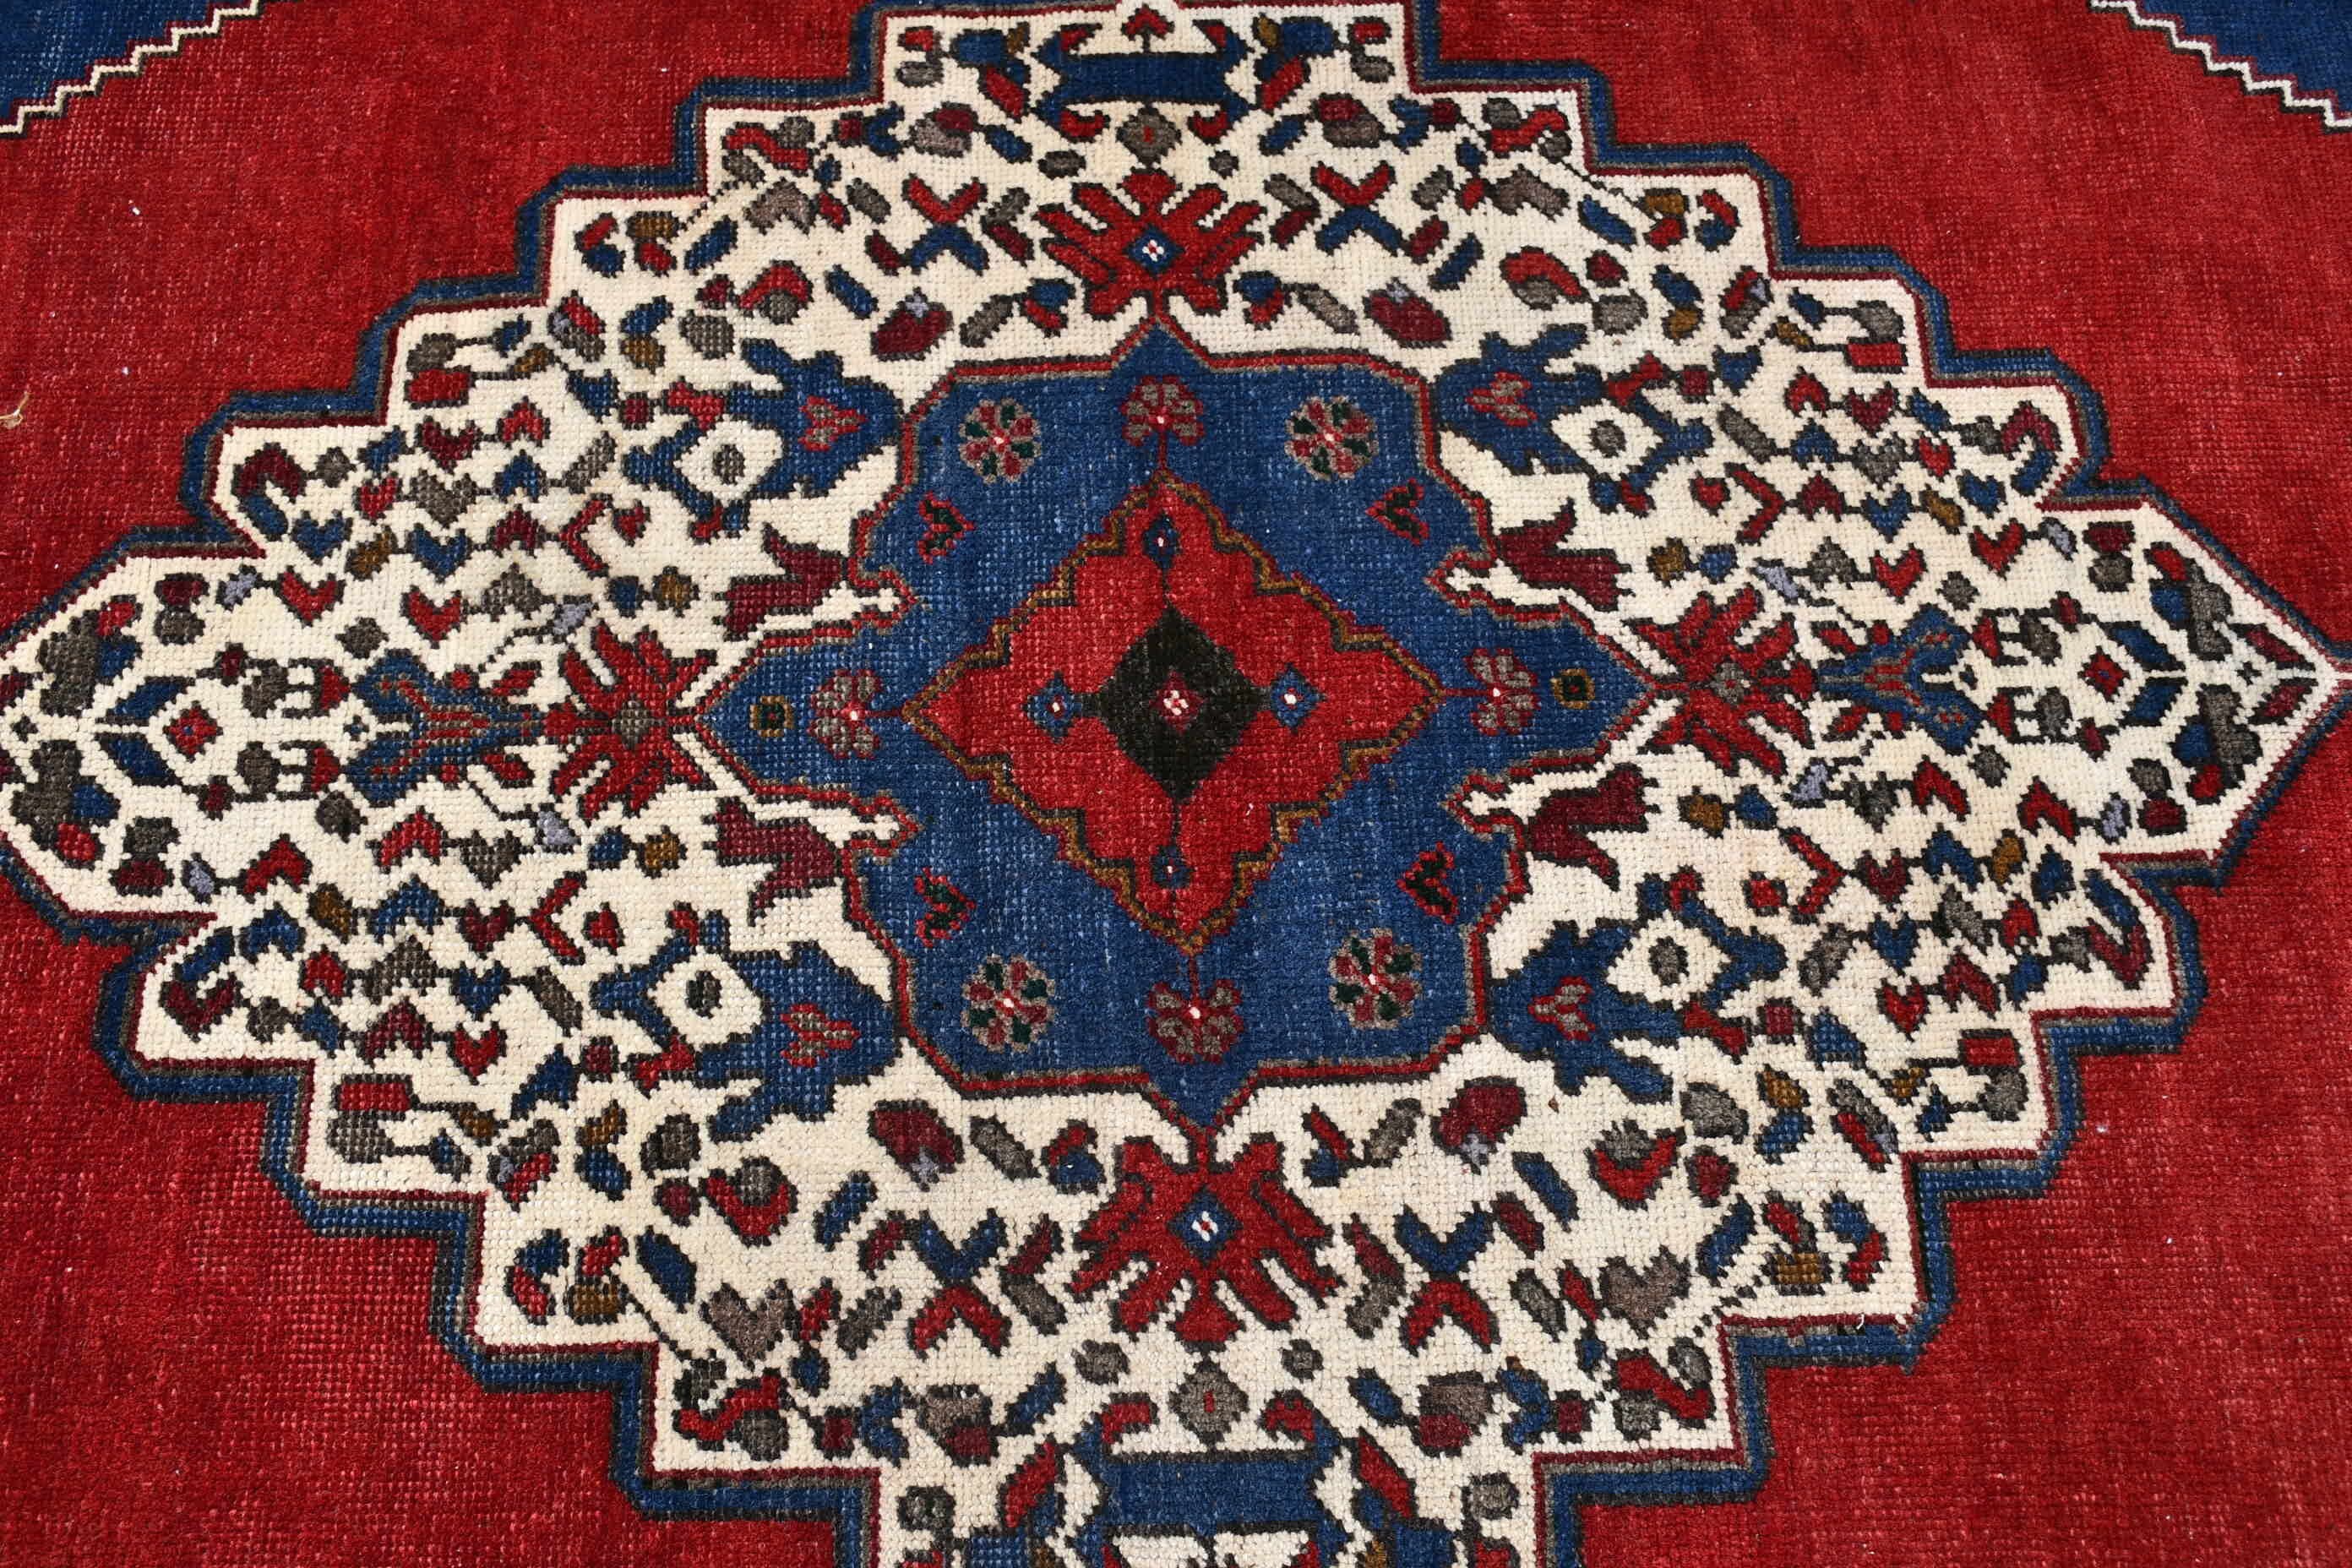 Vintage Rug, Red Cool Rugs, Turkish Rugs, Rugs for Bedroom, Nursery Rug, Antique Rug, Home Decor Rug, Entry Rugs, 3.3x5.7 ft Accent Rug